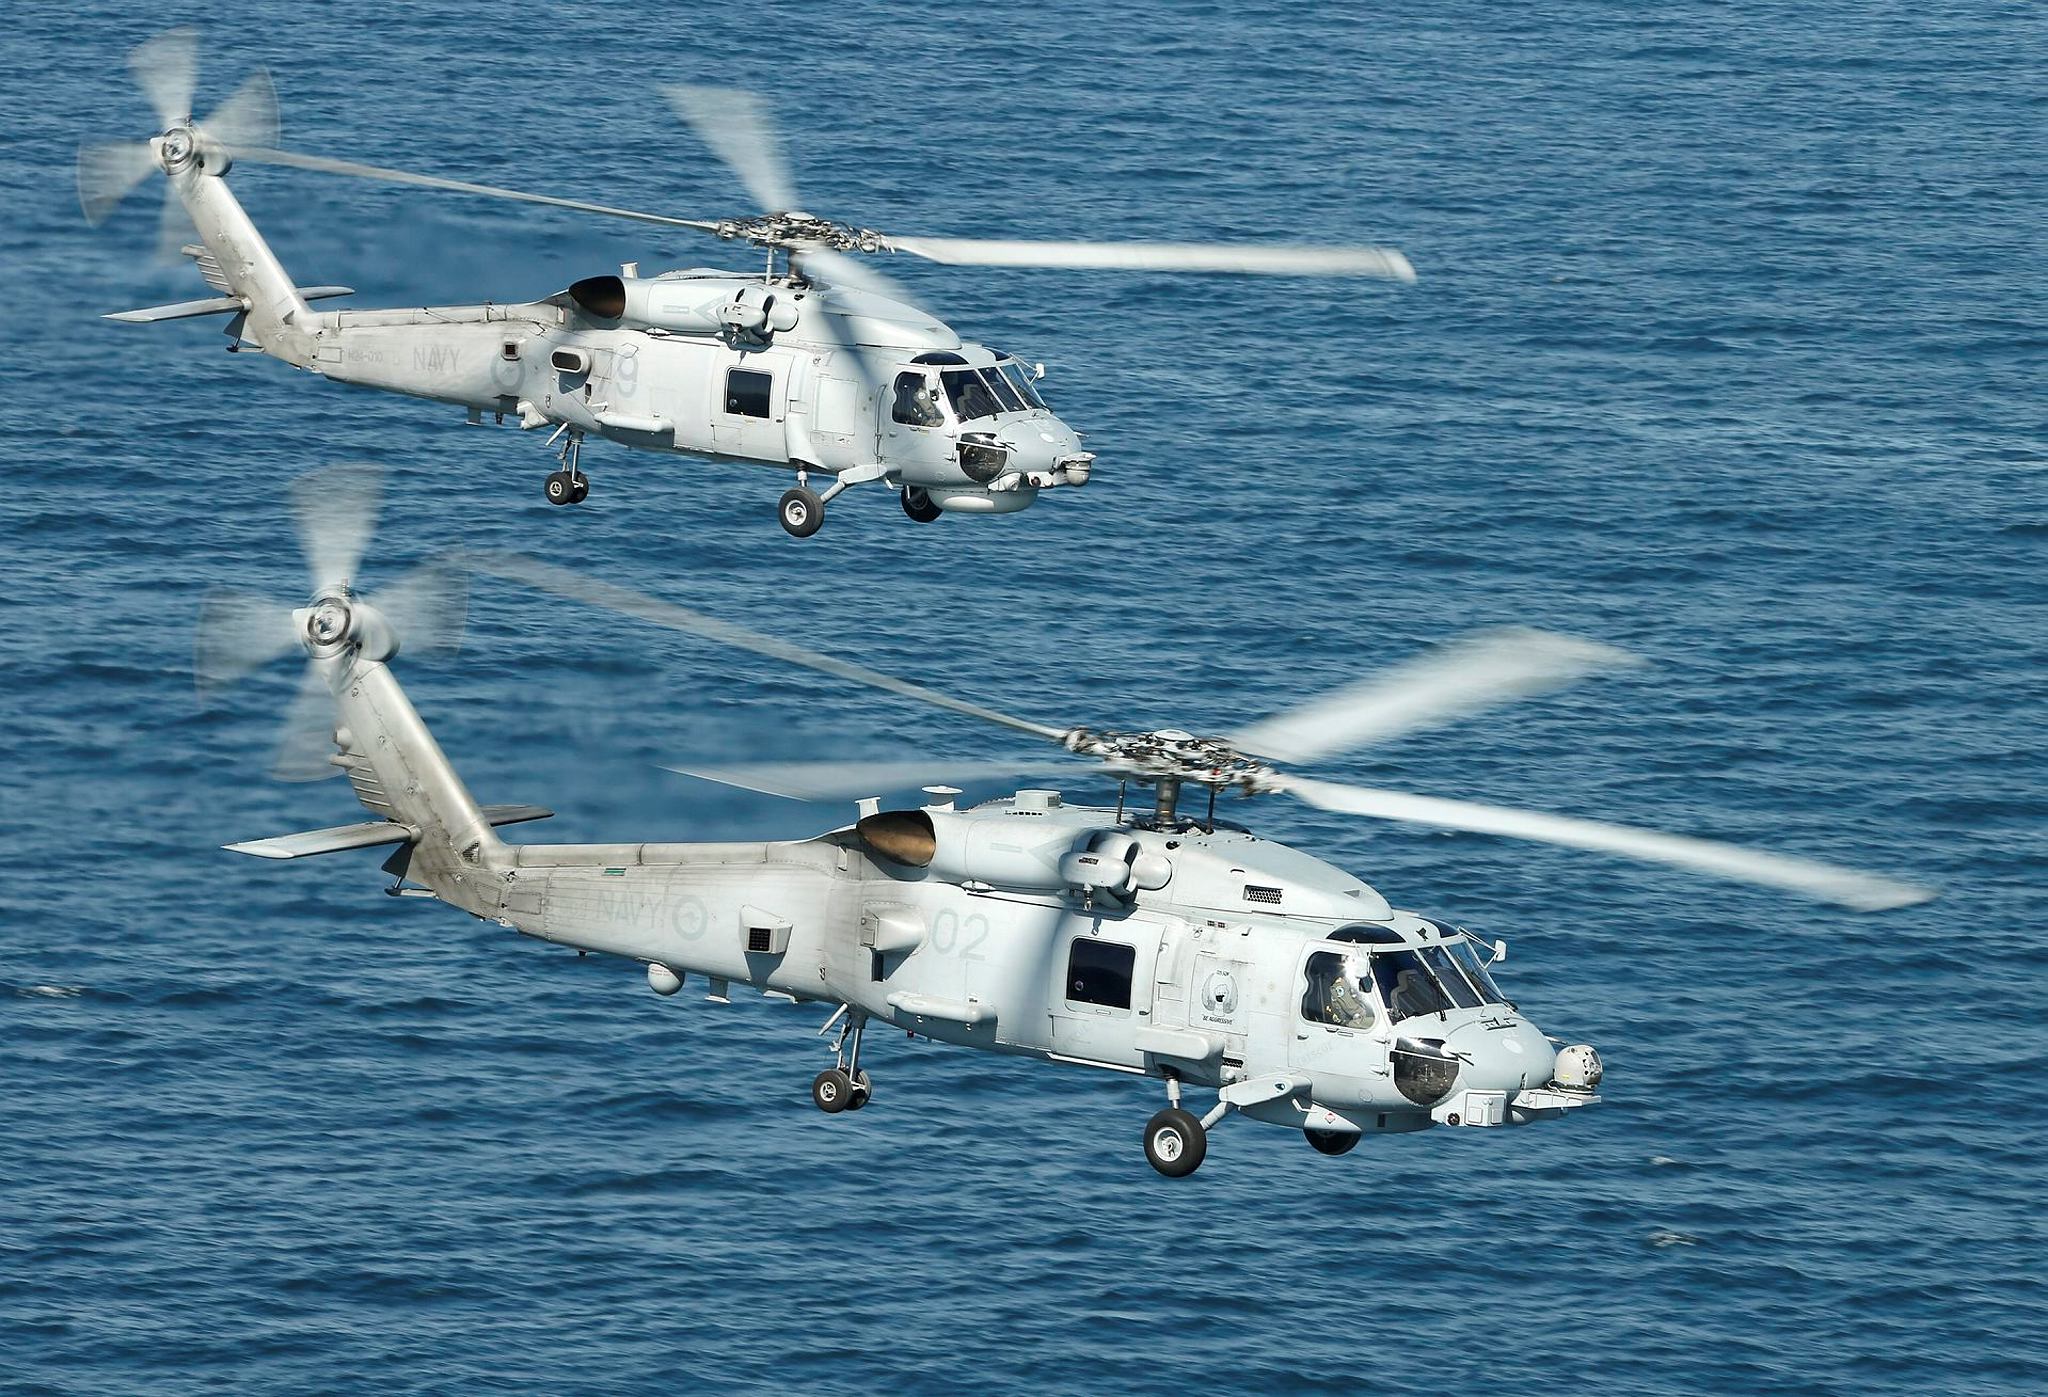 Australian Lockheed Martin MH-60R helicopters. Commonwealth of Australia - Department of Defence